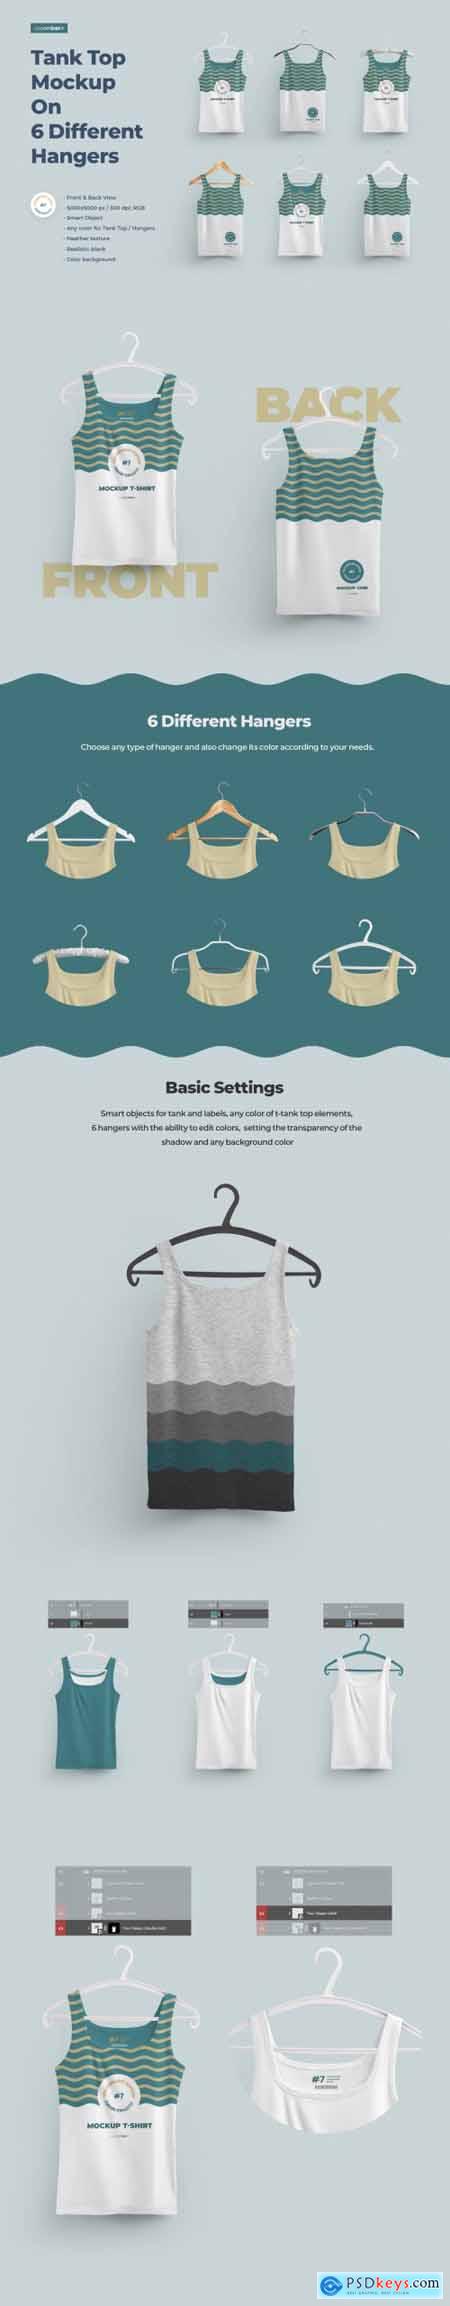 2 Mockups Tank Top With 6 Different Hangers